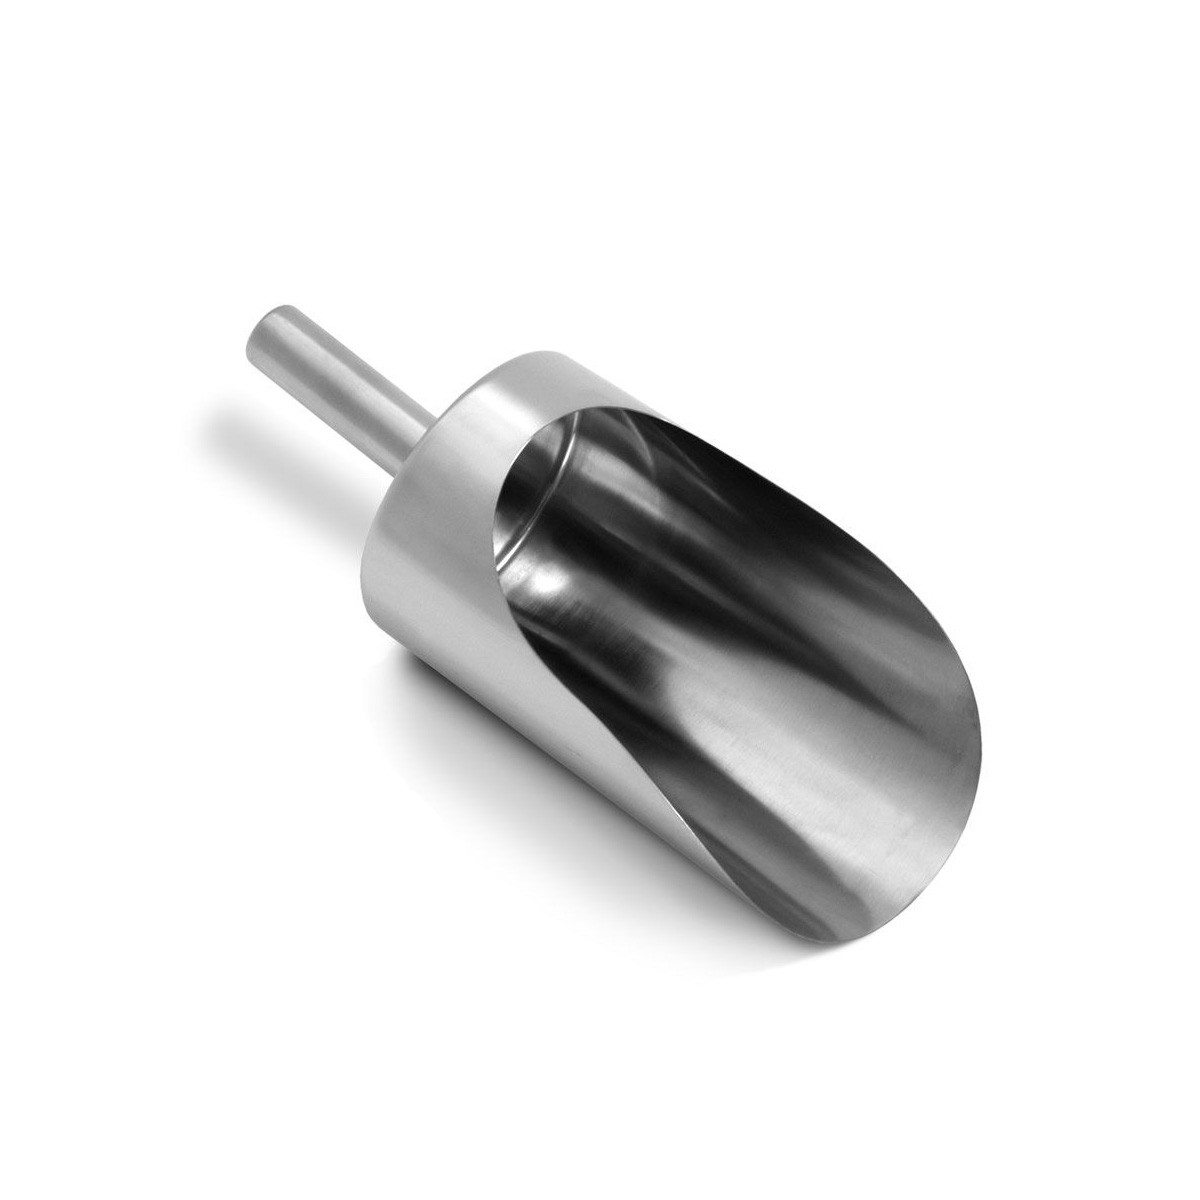 FoodScoop - hand scoop for the food industry Metal scoops (stainless steel  AISI 316 (1.4404), stainless steel AISI 304 (1.4301), aluminium) for  laboratory, industry, food and sampling - Pumps, samplers, sampling  systems, laboratory equipment - Bürkle GmbH